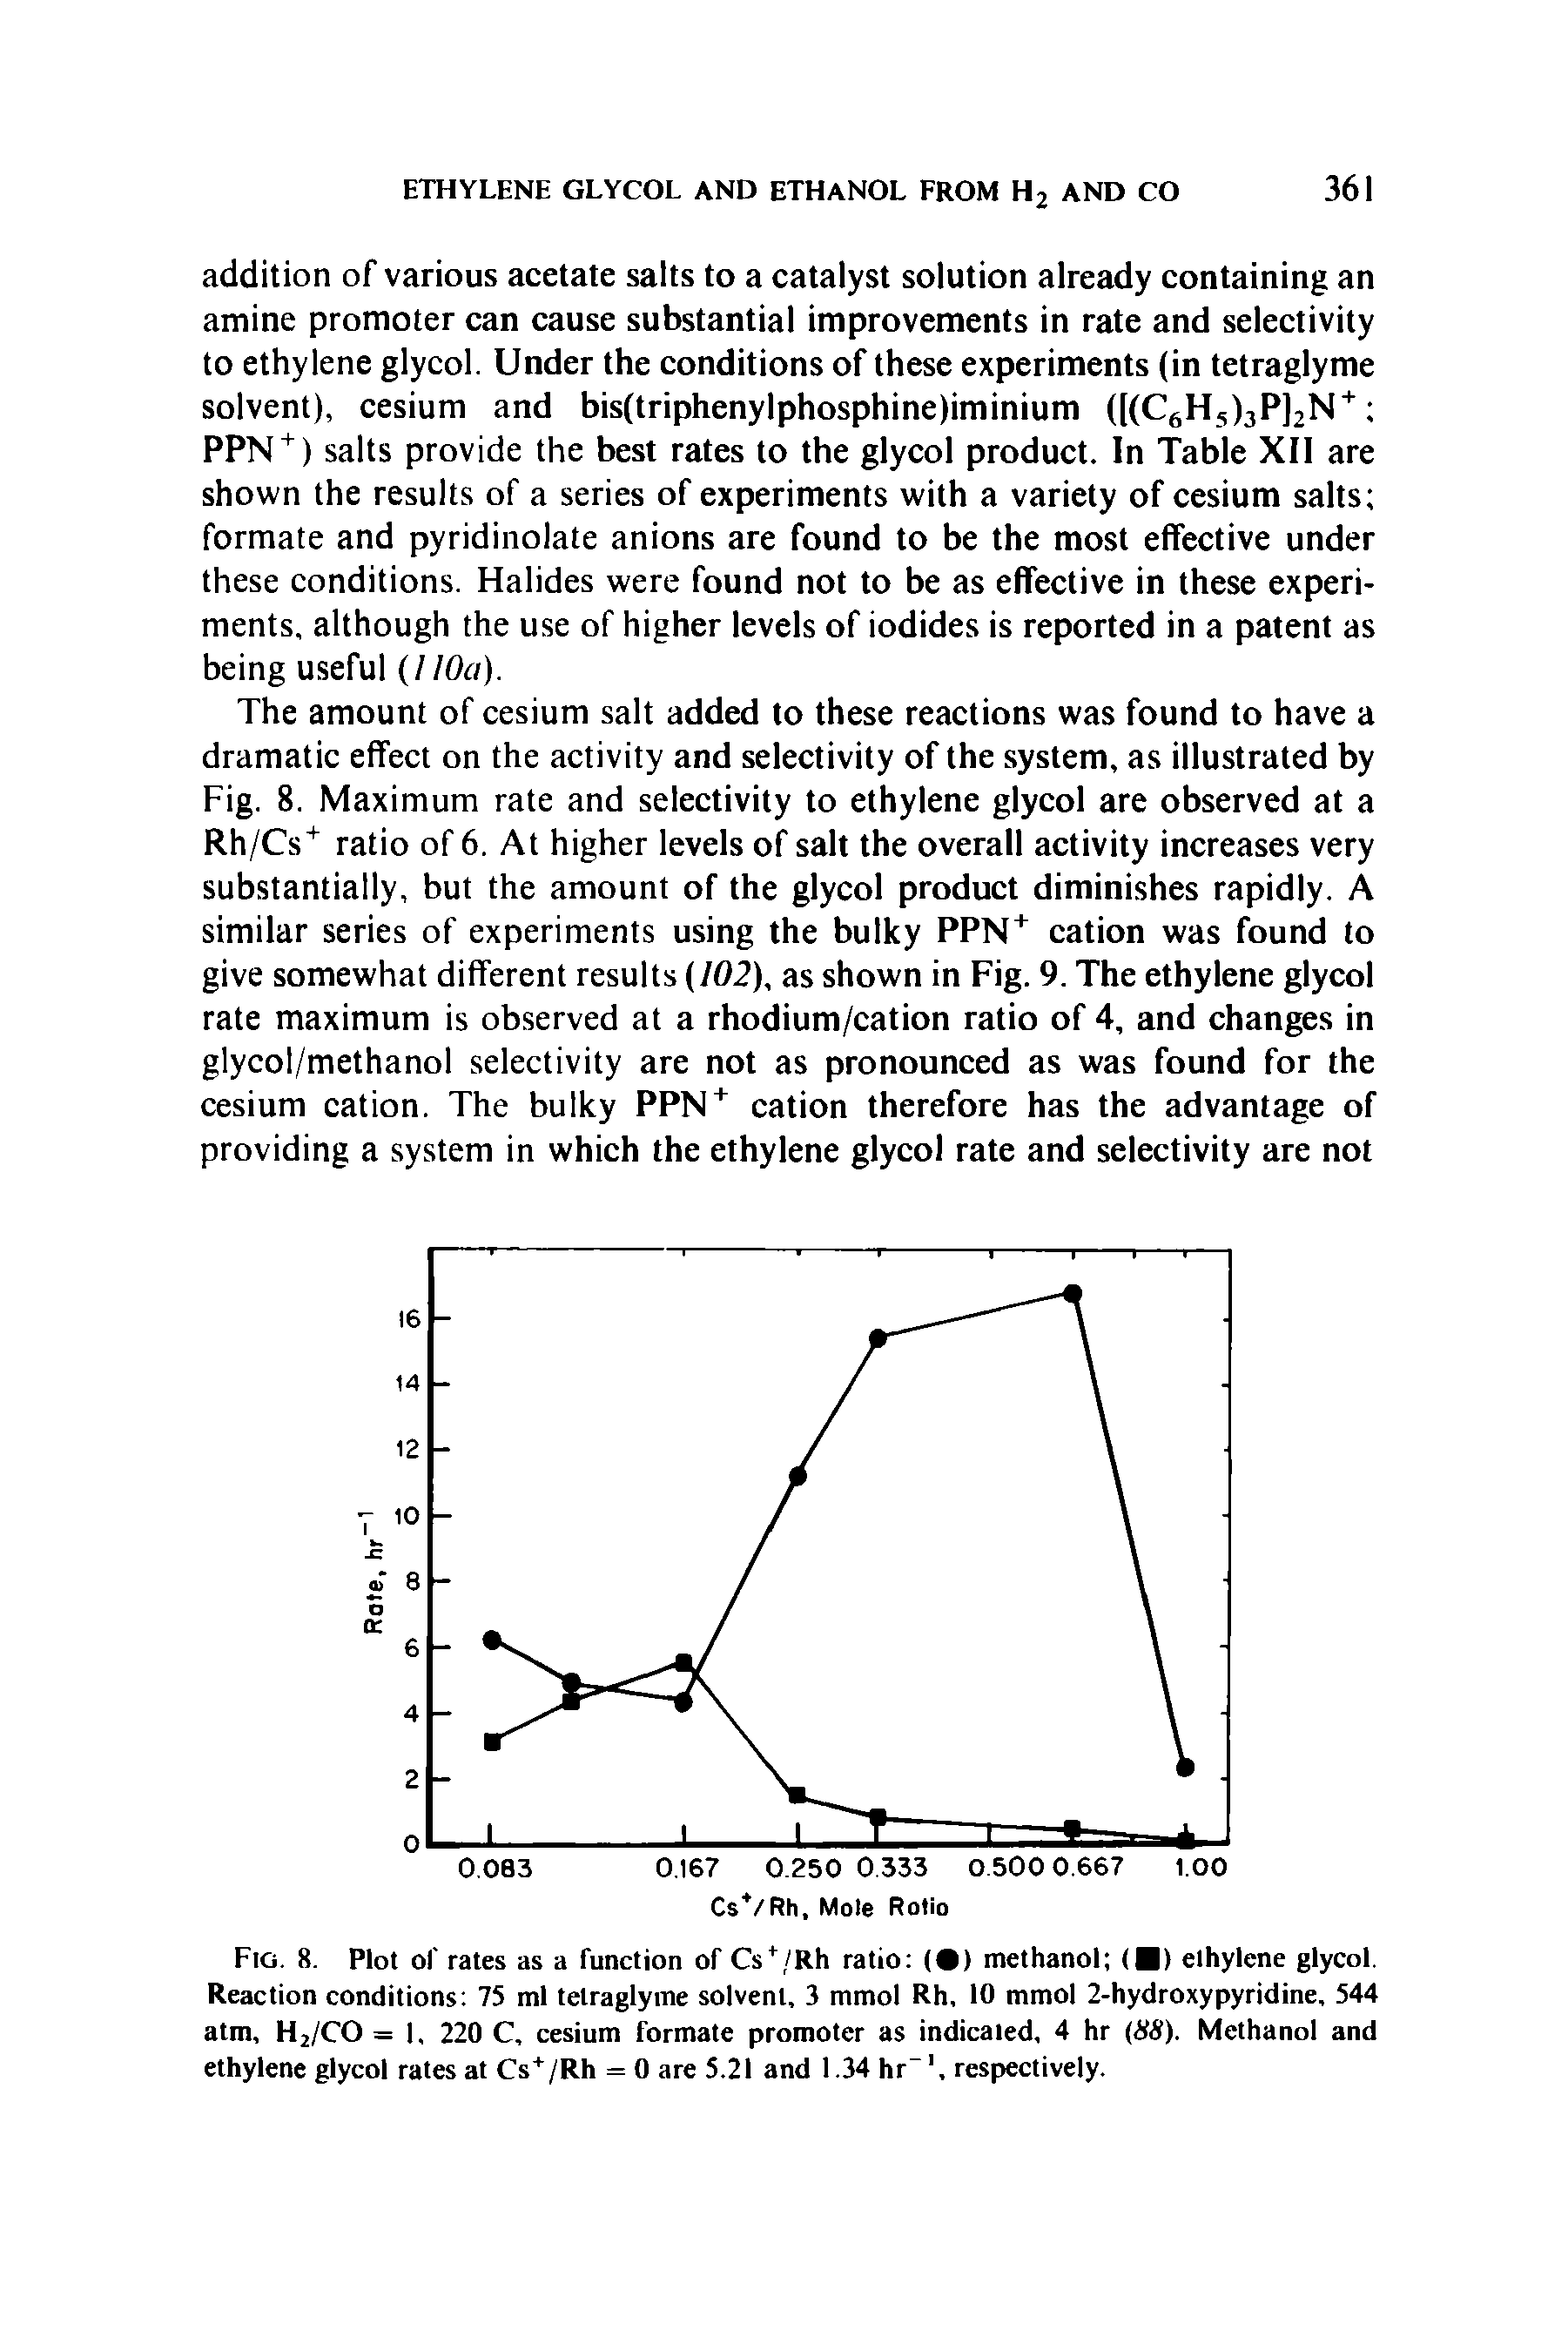 Fig. 8. Plot of rates as a function of Cst/Rh ratio ( ) methanol ( ) ethylene glycol. Reaction conditions 75 ml tetraglyme solvent, 3 mmol Rh, 10 mmol 2-hydroxypyridine, 544 atm, H2/CO = 1, 220 C, cesium formate promoter as indicated, 4 hr (88). Methanol and ethylene glycol rates at Cs+/Rh = 0 are 5.21 and 1.34 hr-1, respectively.